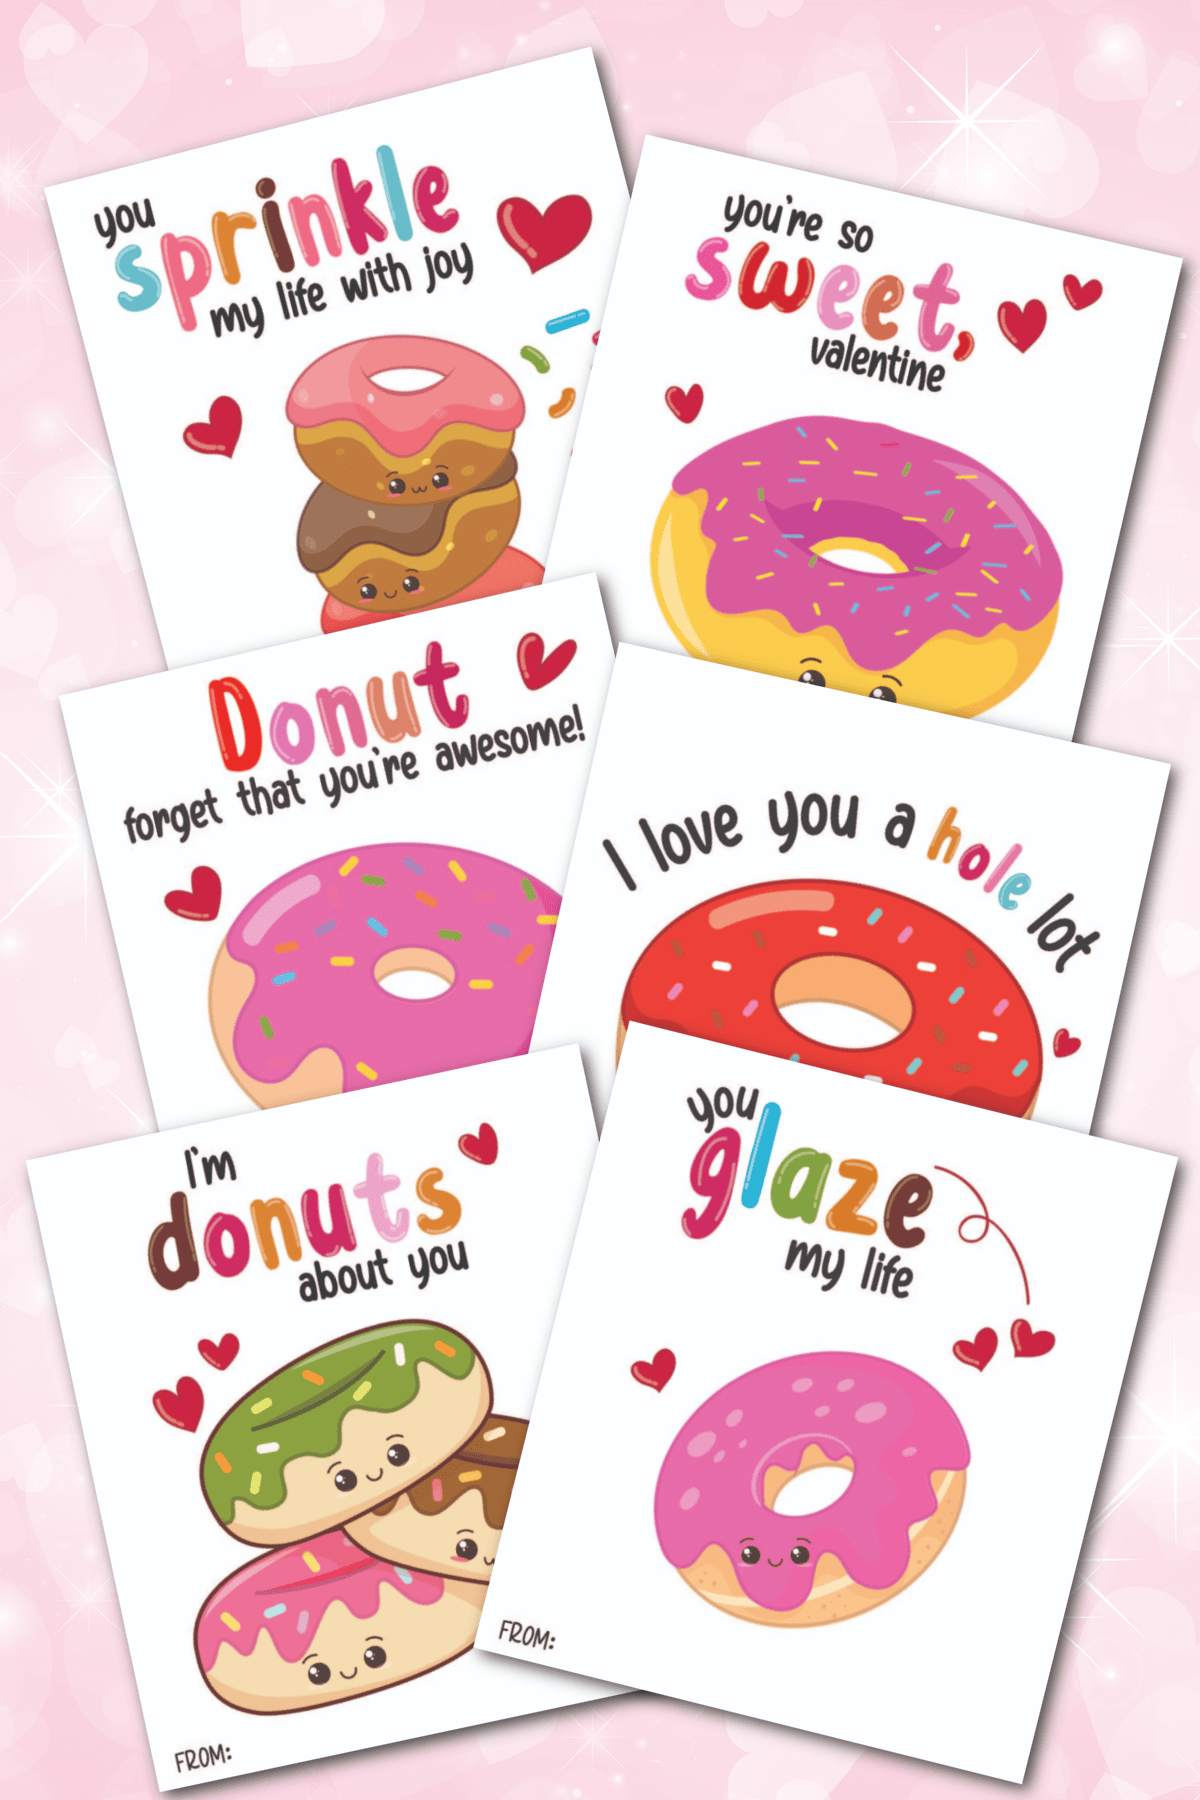 Donut cards for Valentine's Day